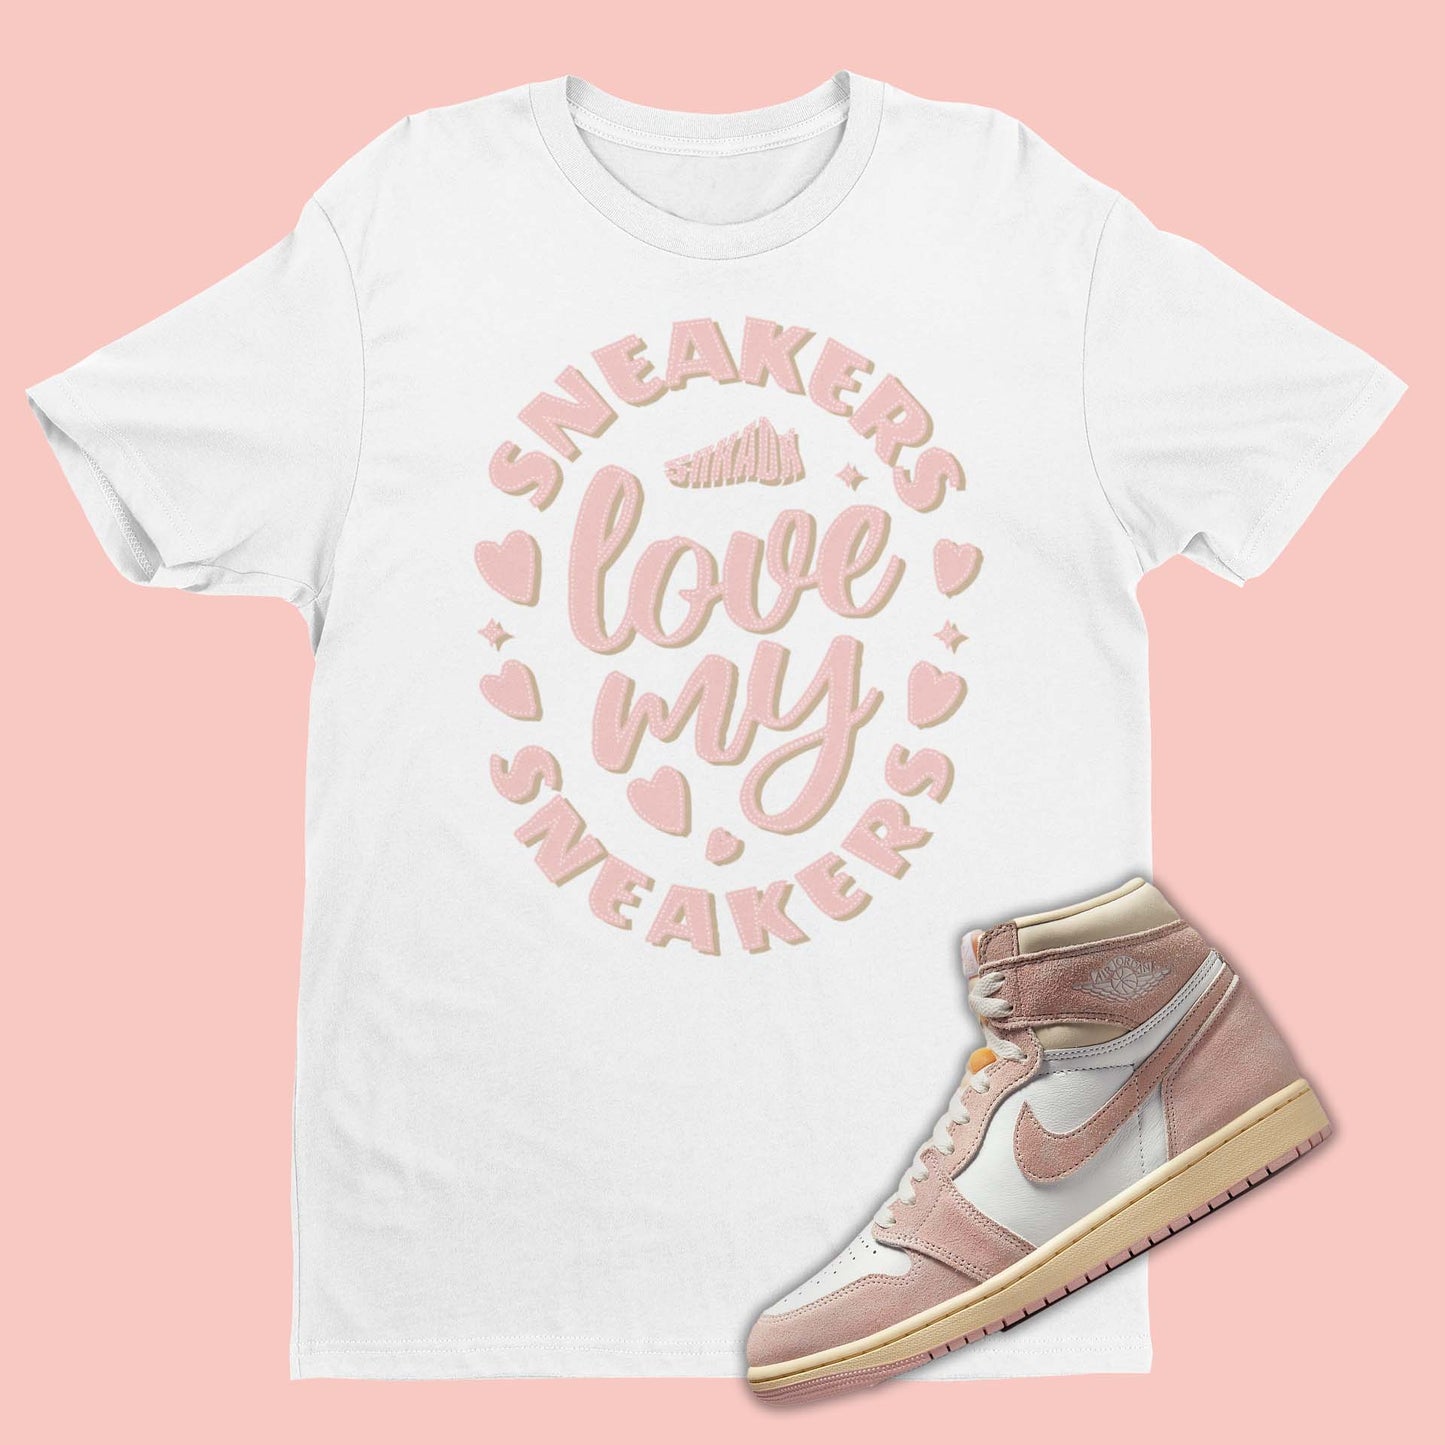 This sneaker match tee is the perfect shirt to match your Air Jordan 1 High Washed Pink. This Retro 1s sneaker match tee will make a great gift for sneakerheads or sneaker collectors. Sneaker match tee for Style Code: FD2596-600. Check out our latest Jordan matching shirts and more shirts to match the Washed Pink 1s available now!